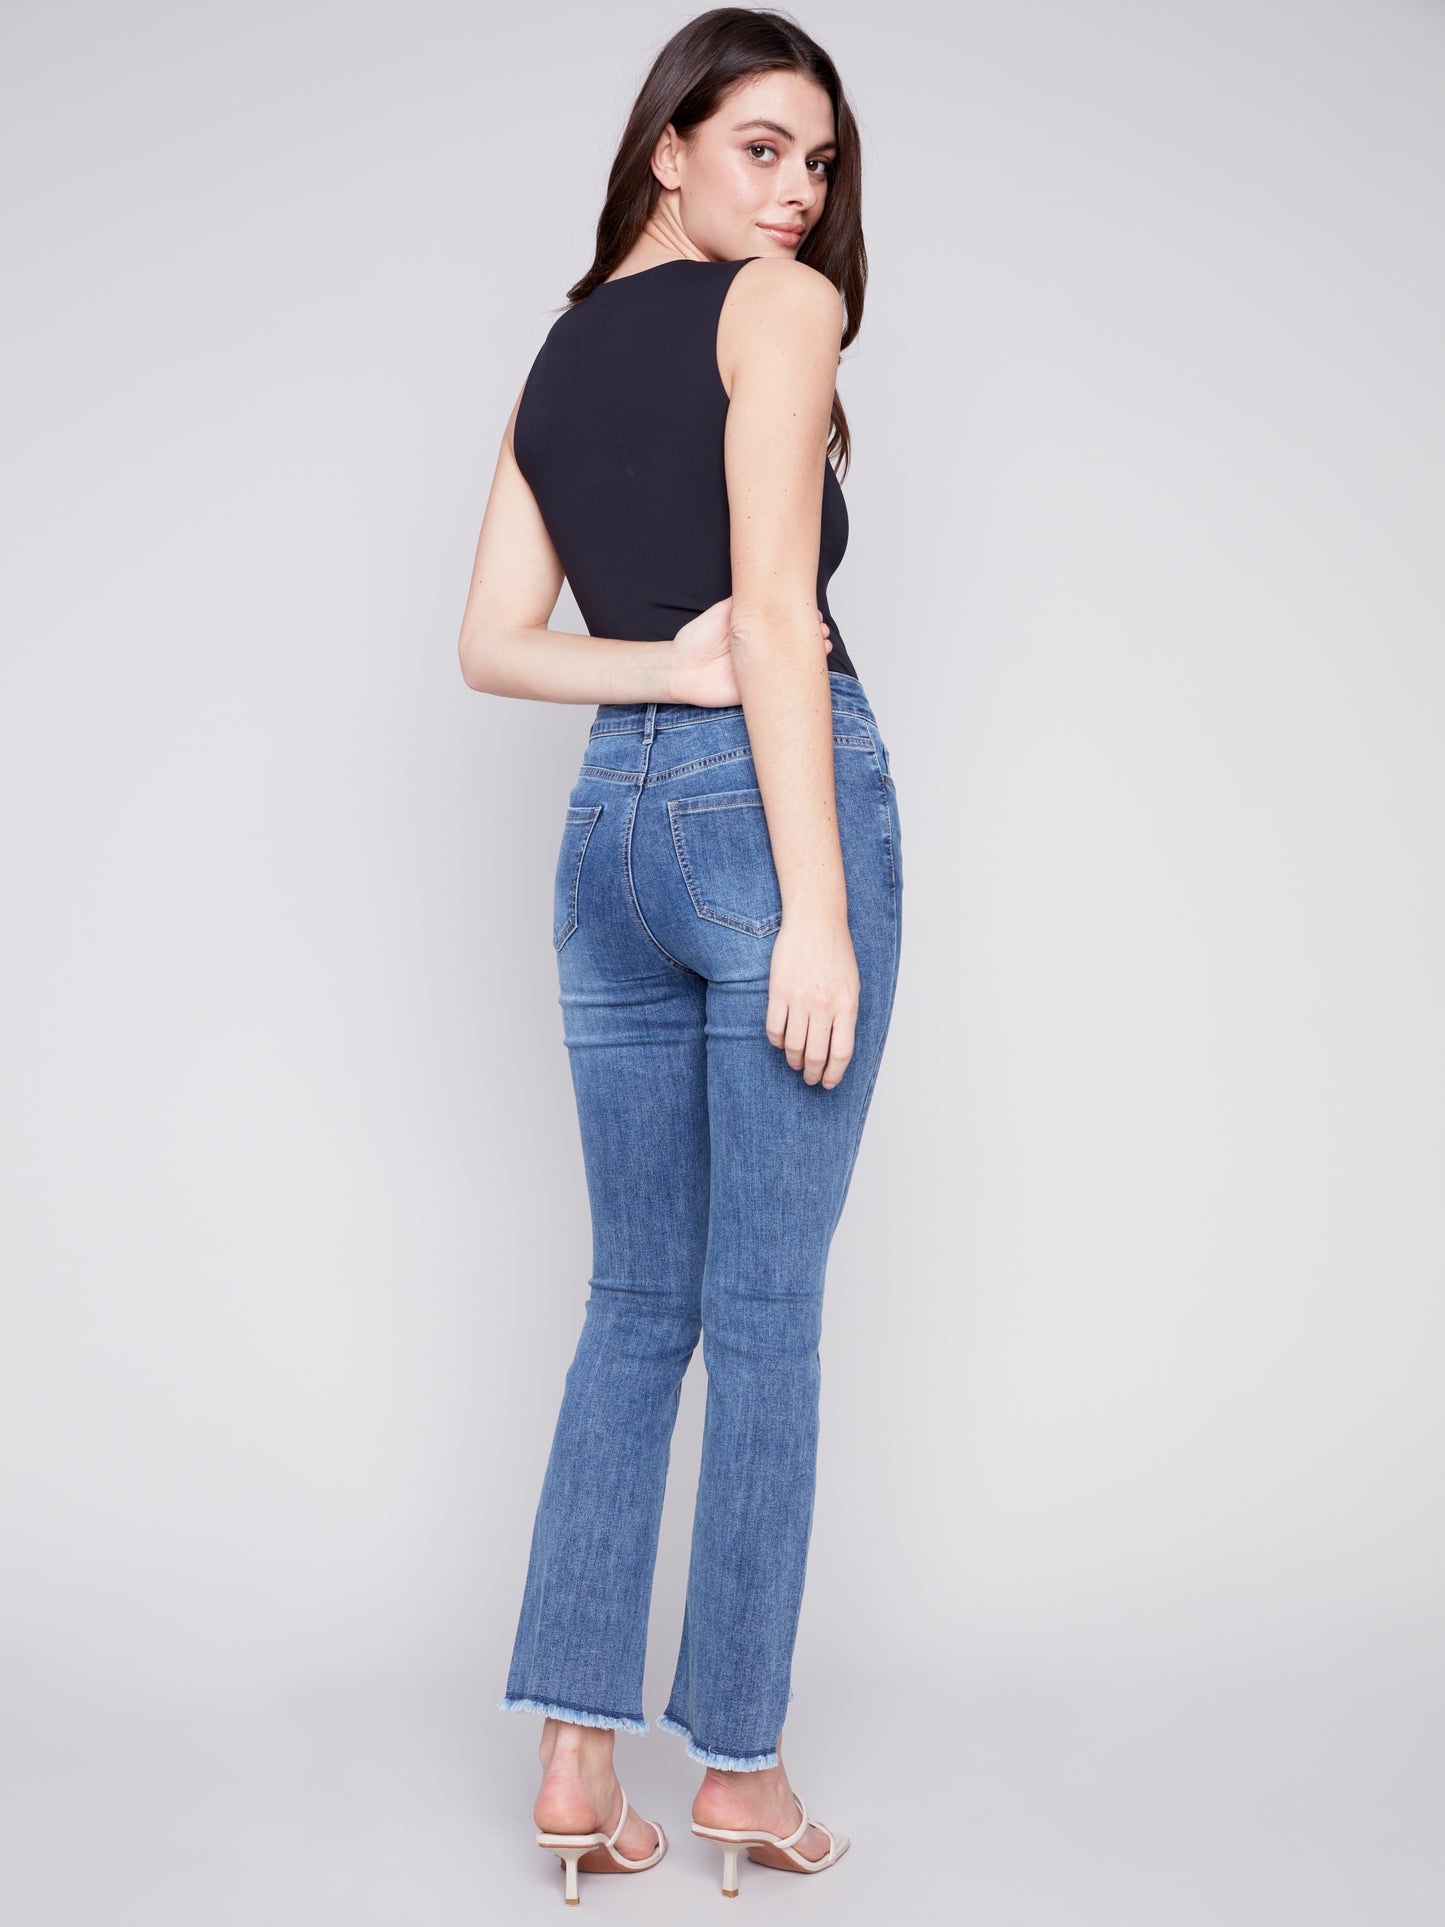 A woman donning a must-have pair of Charlie B Asymmetrical Boot Cut Hem Jeans.